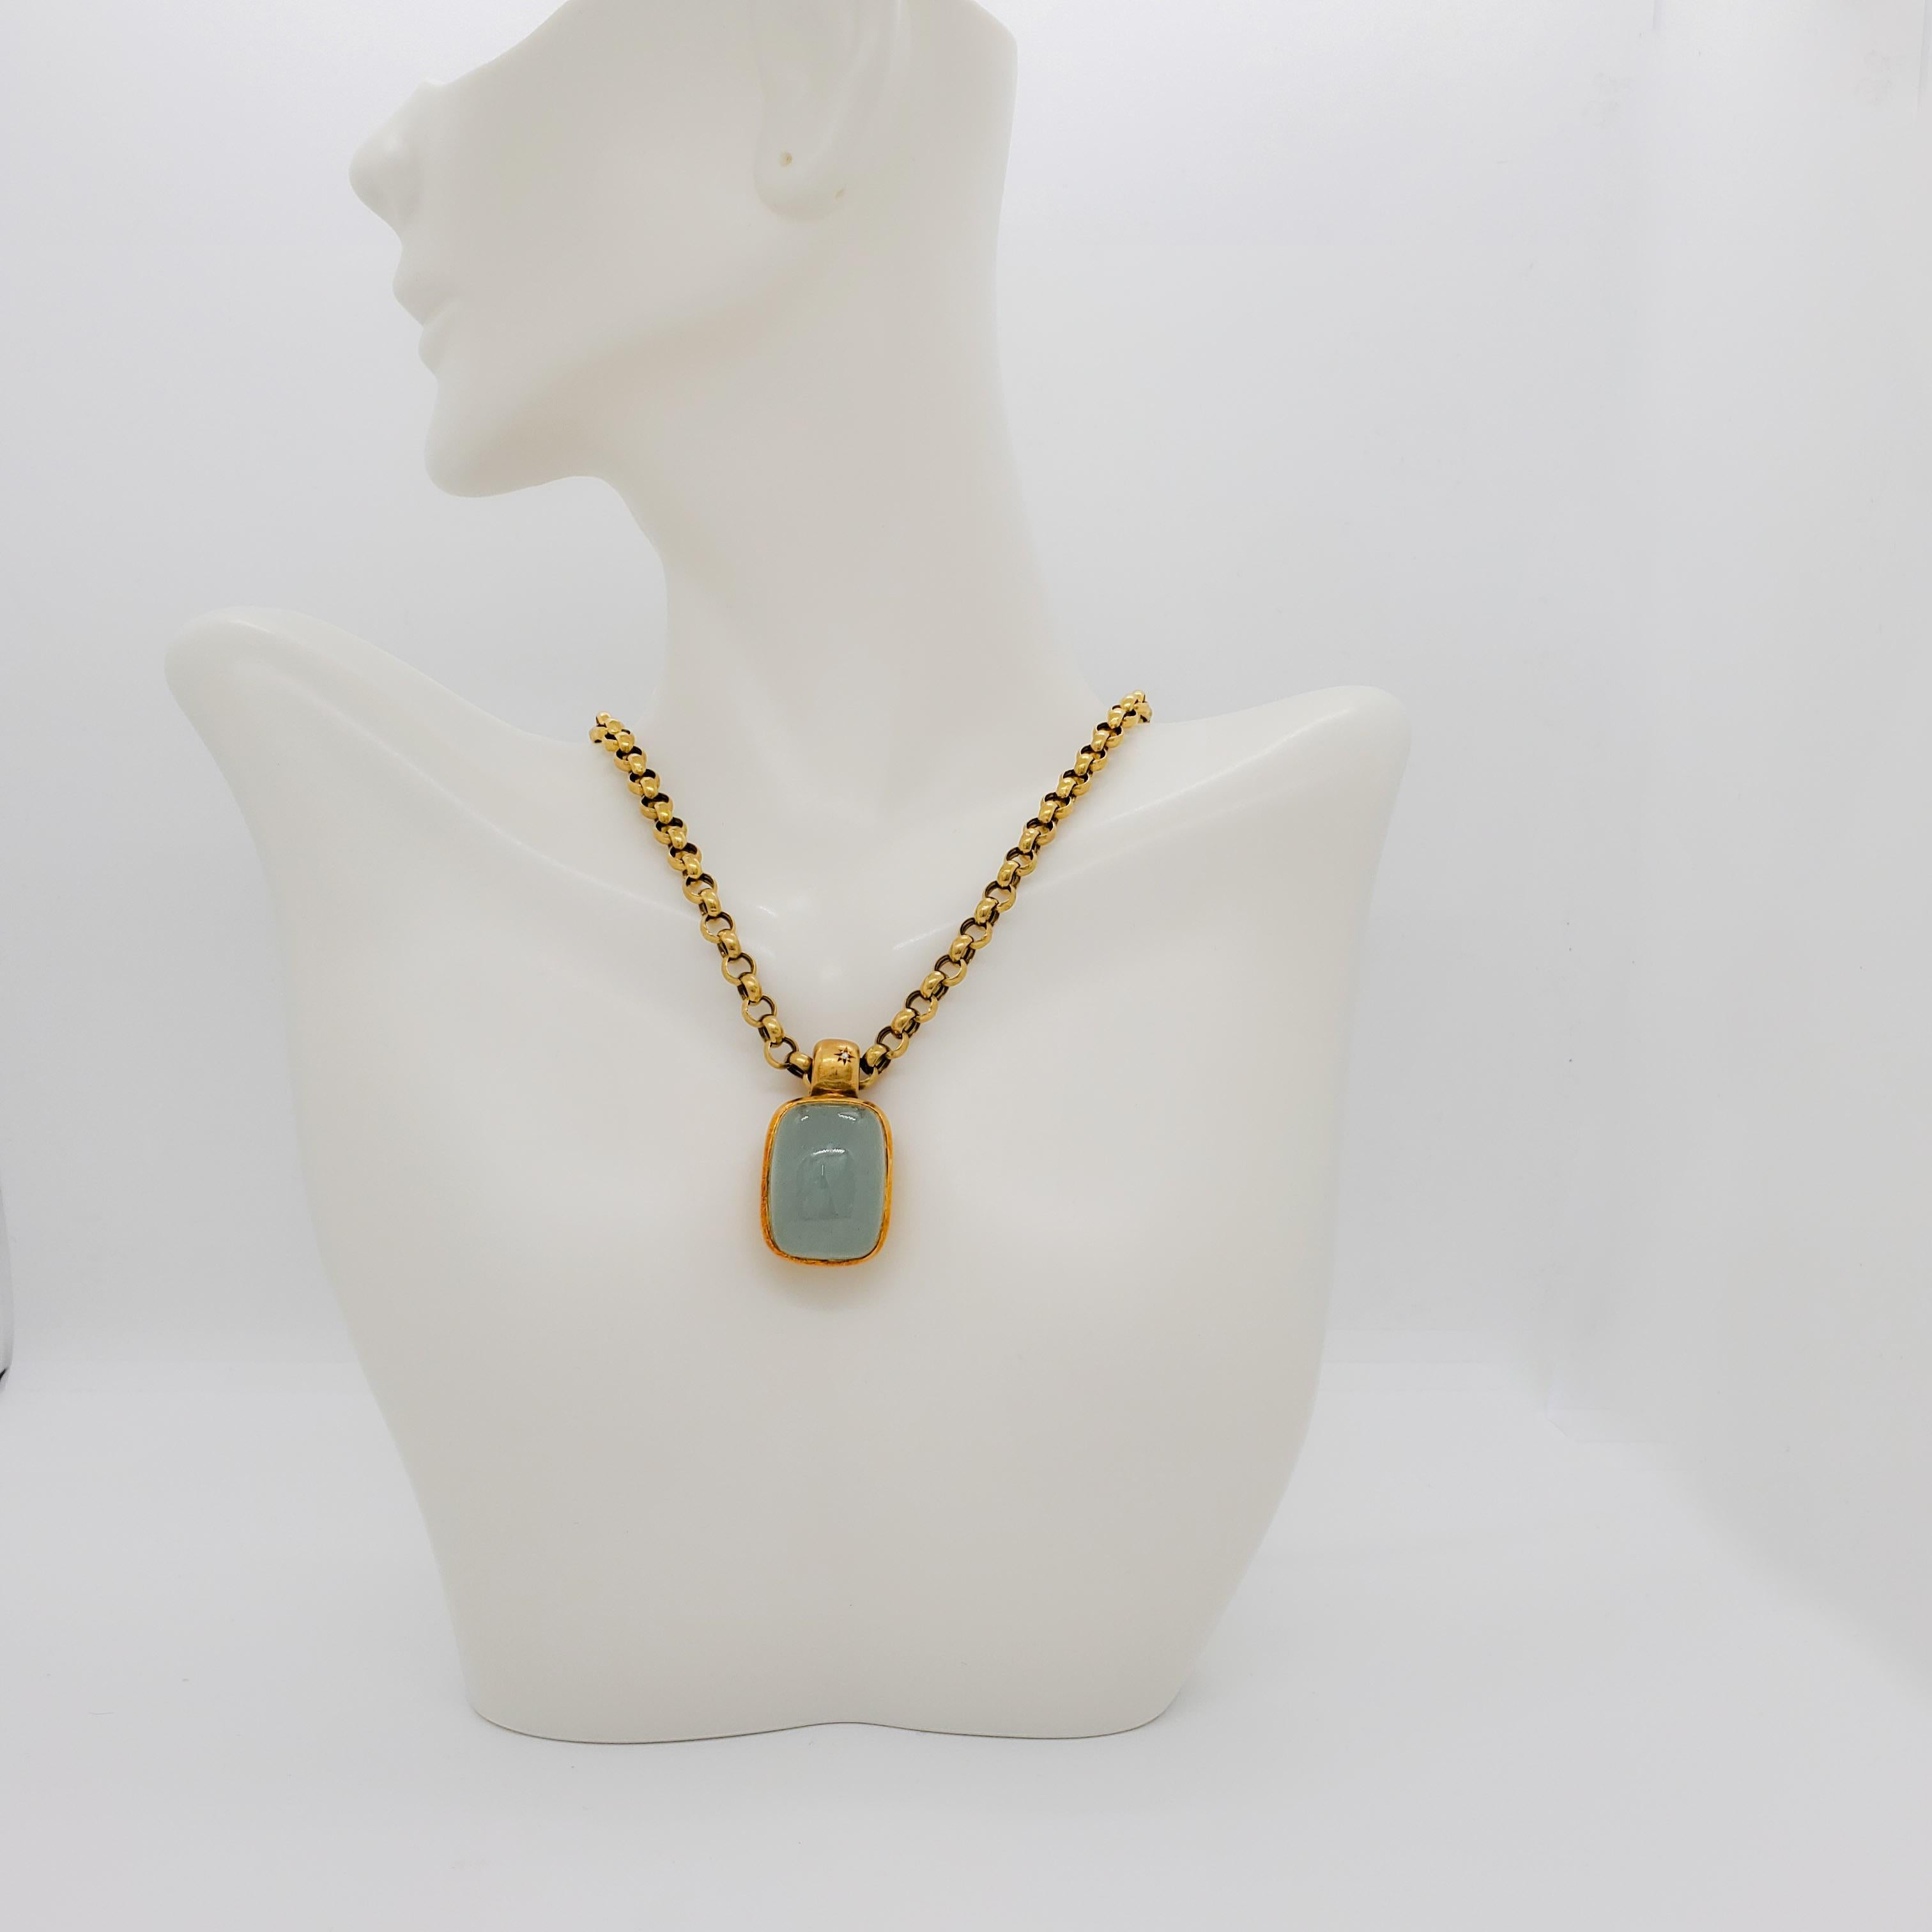 light green stone necklace